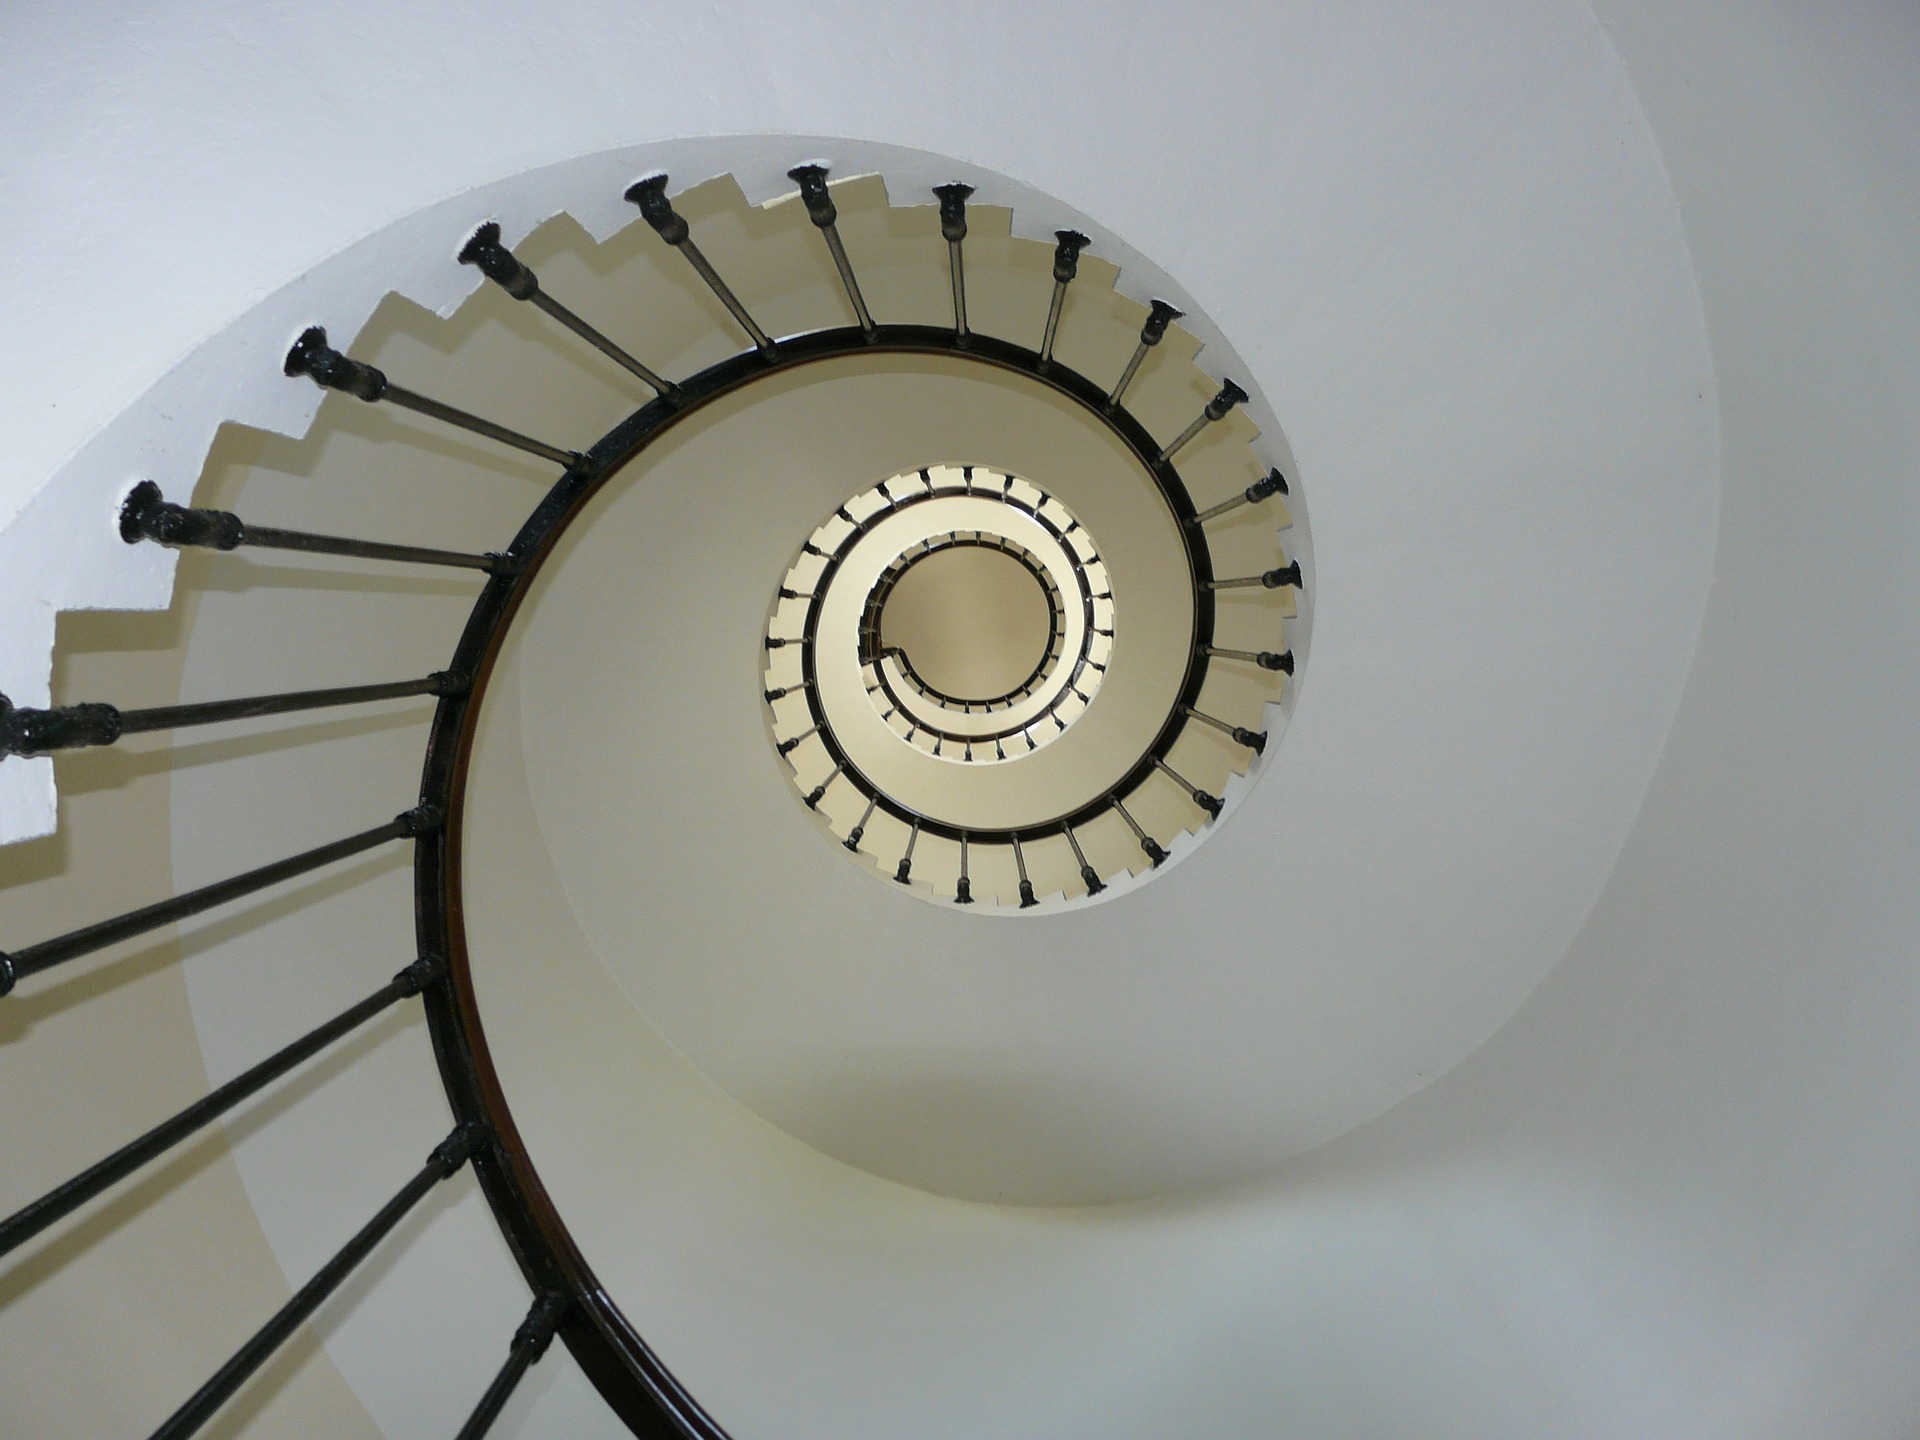 Stunning staircases: 6 examples of amazing staircase design